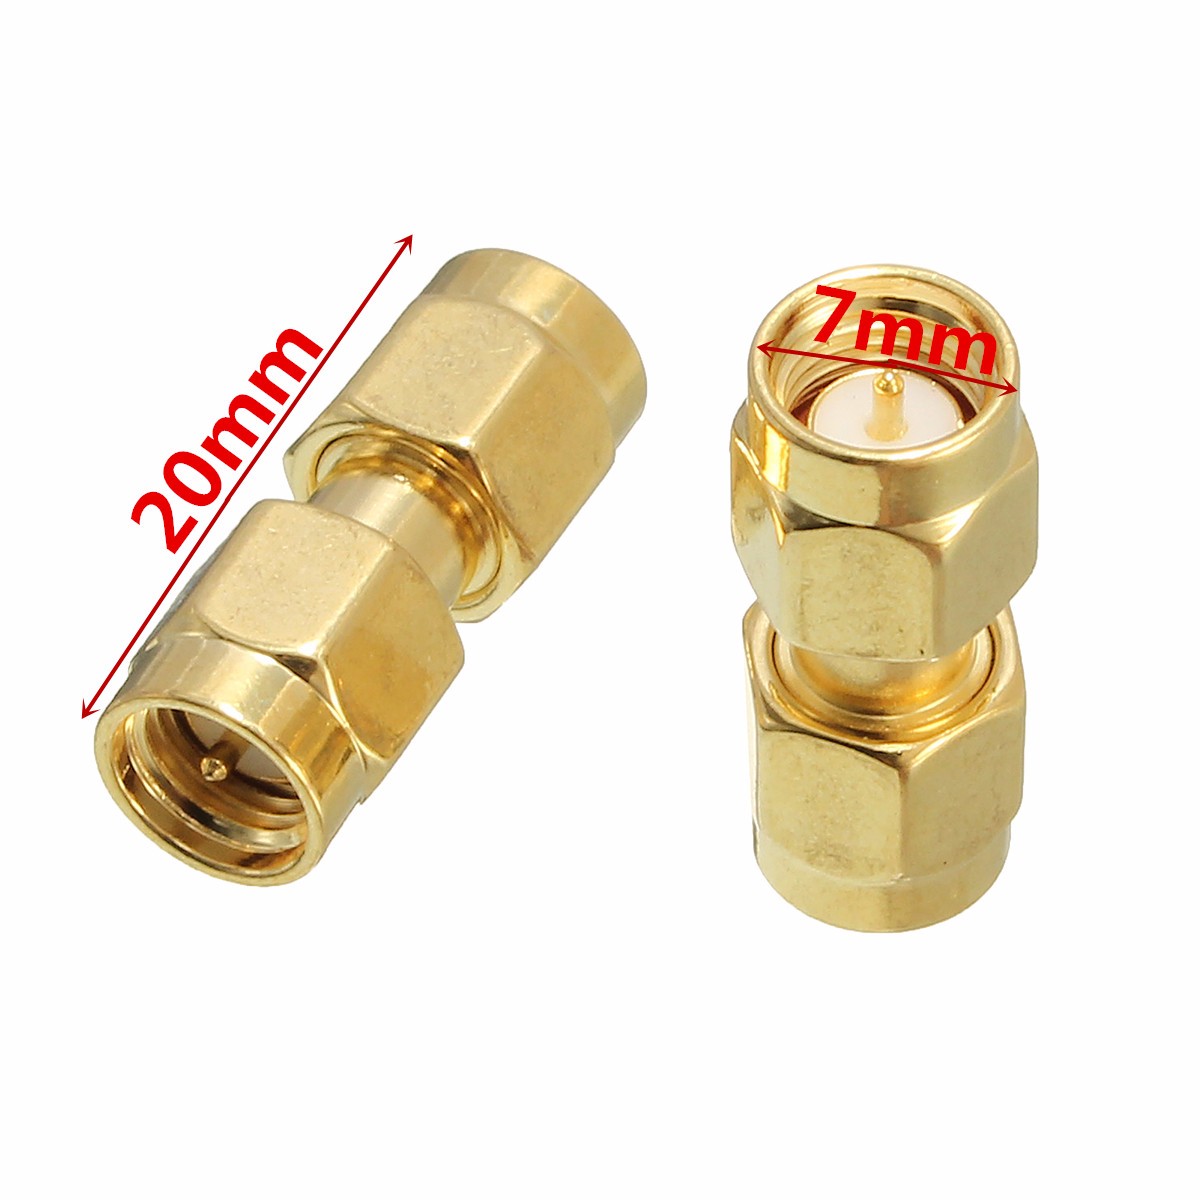 Excellwayreg-CA01-2Pcs-Copper-SMA-Male-To-SMA-Male-Plug-RF-Coaxial-Adapter-Connector-1073343-9